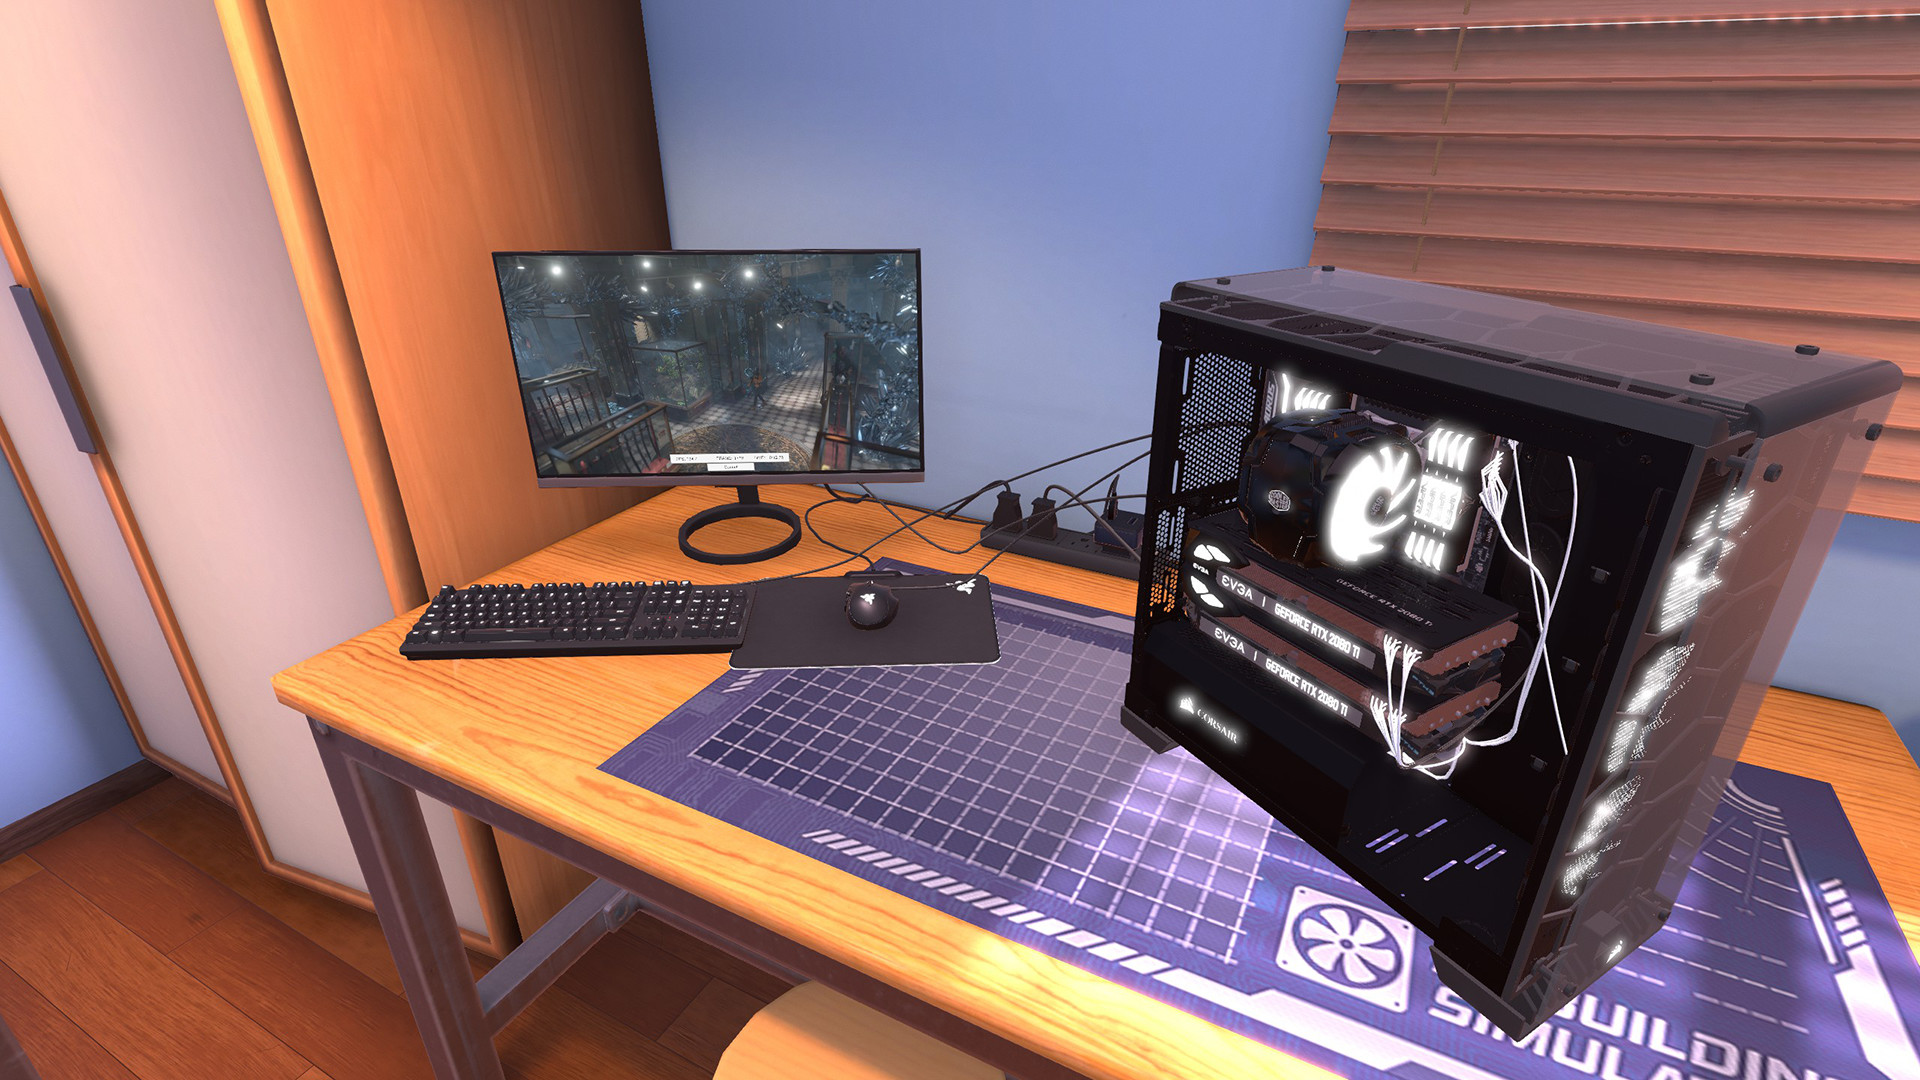 Join over 2 million gamers and download PC Building Simulator free on Epic Games Store